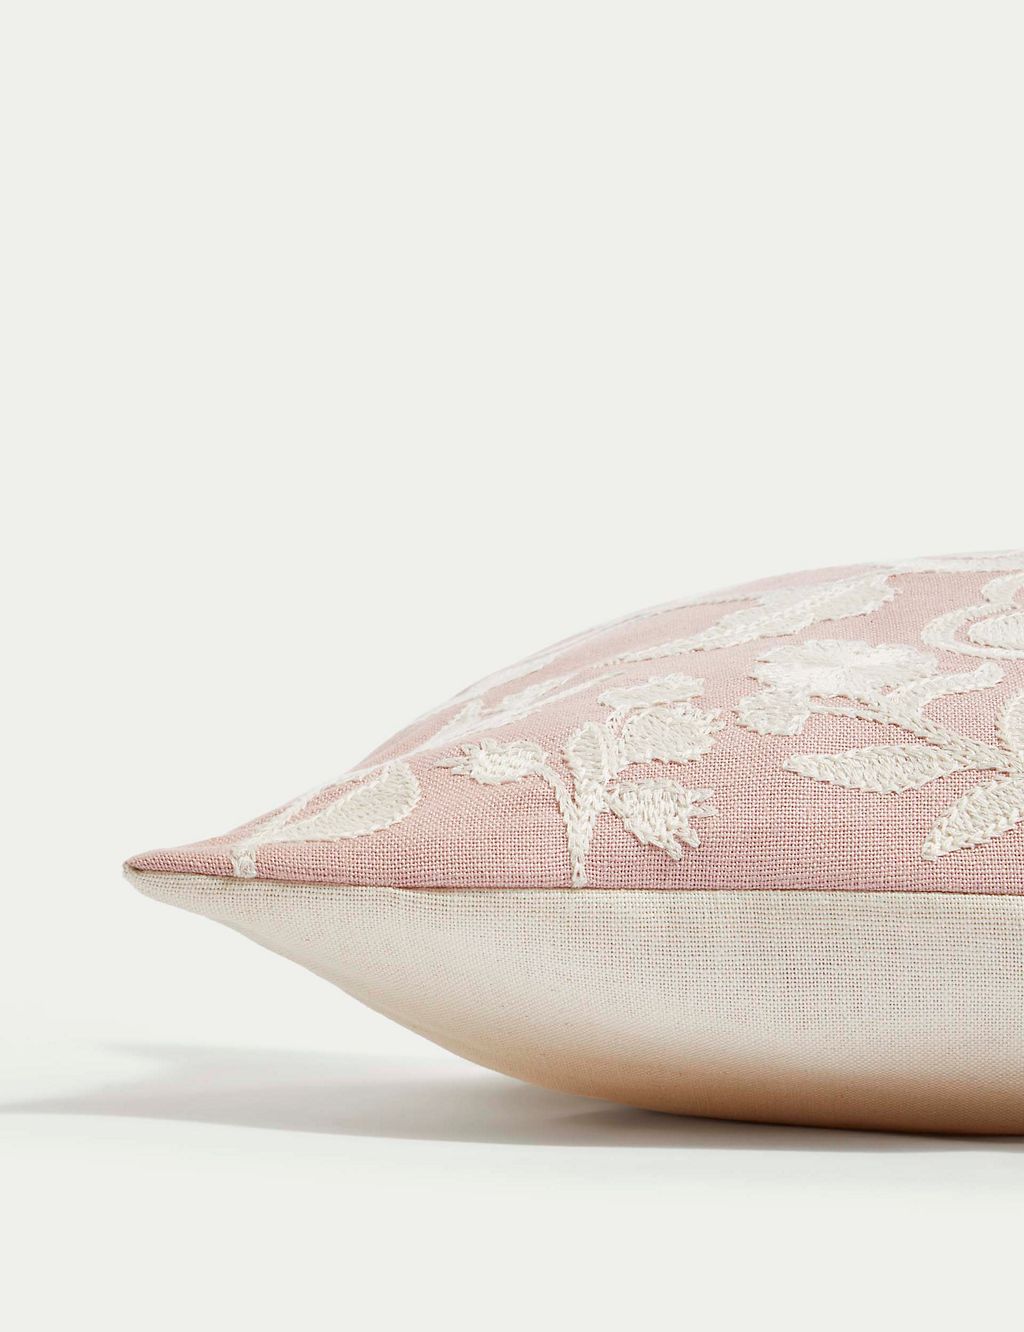 Linen Blend Floral Embroidered Bolster Cushion 1 of 4